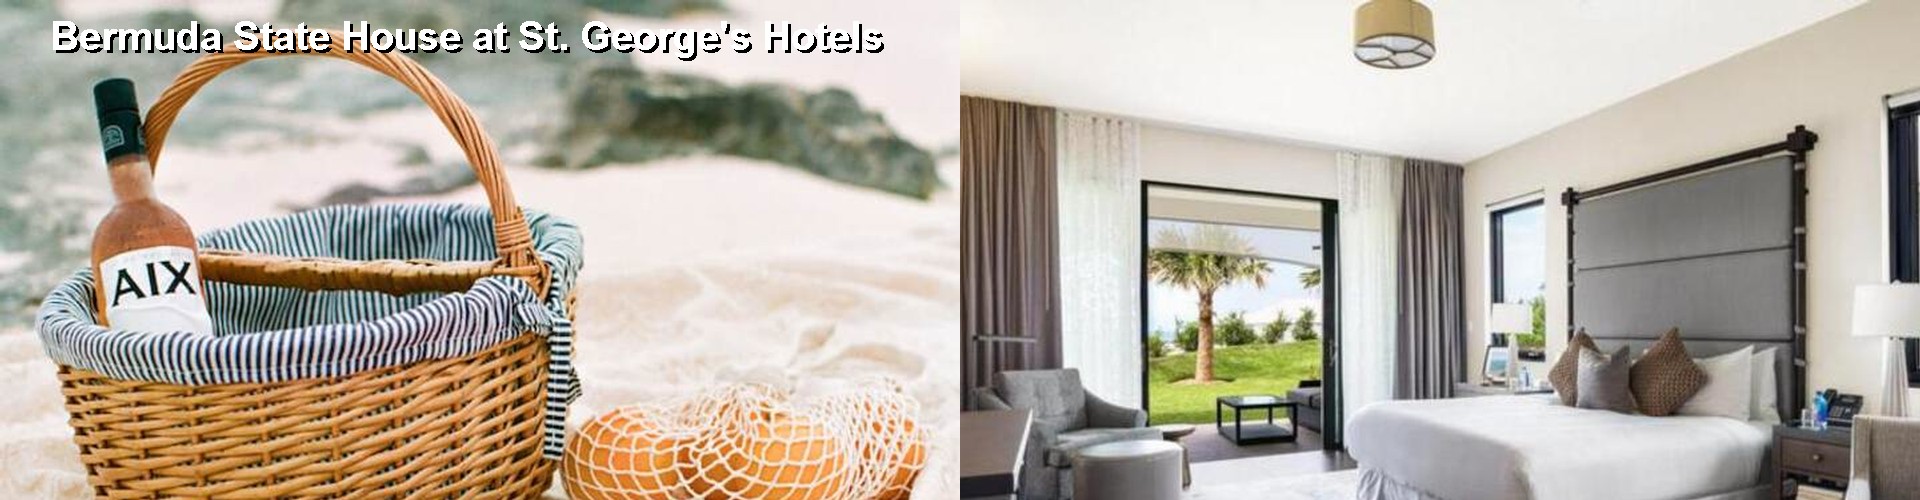 5 Best Hotels near Bermuda State House at St. George's